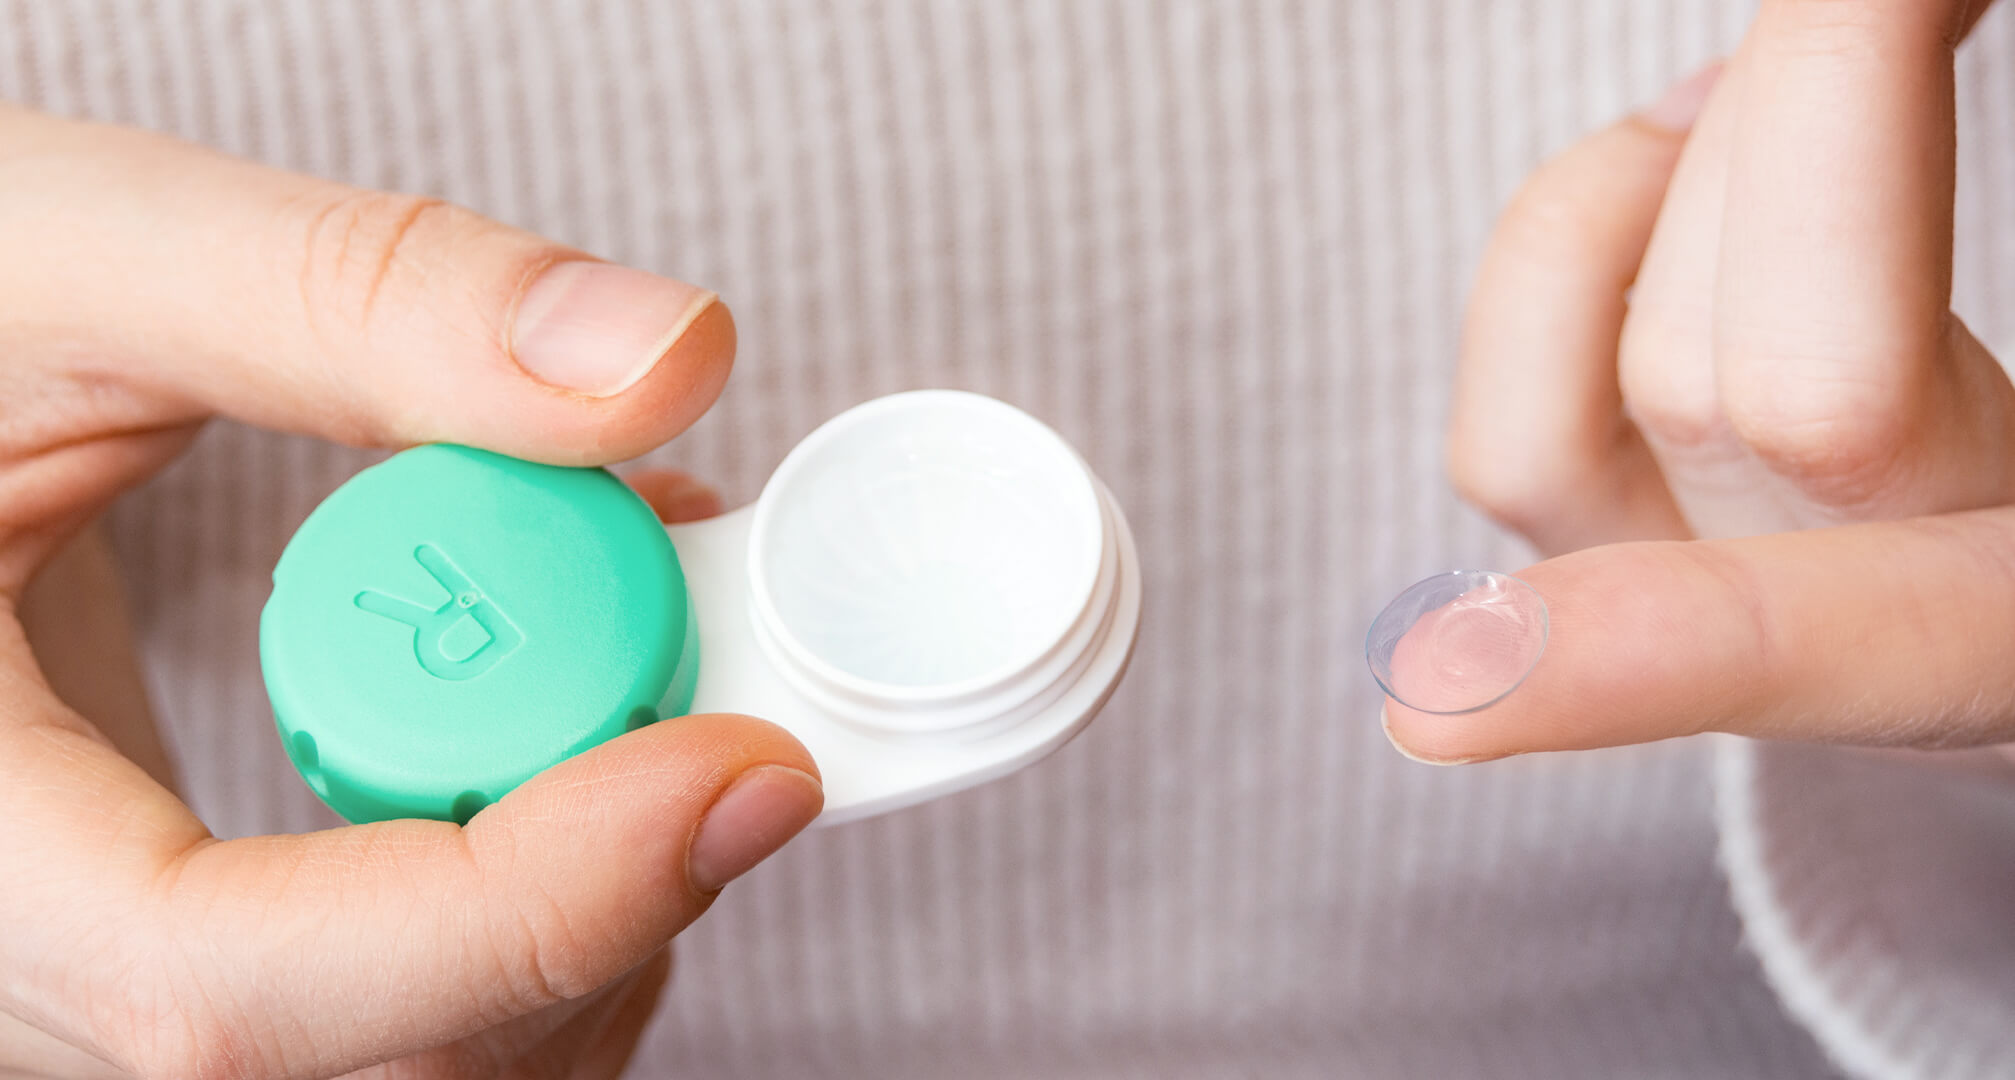 Contact lens case and contact lens